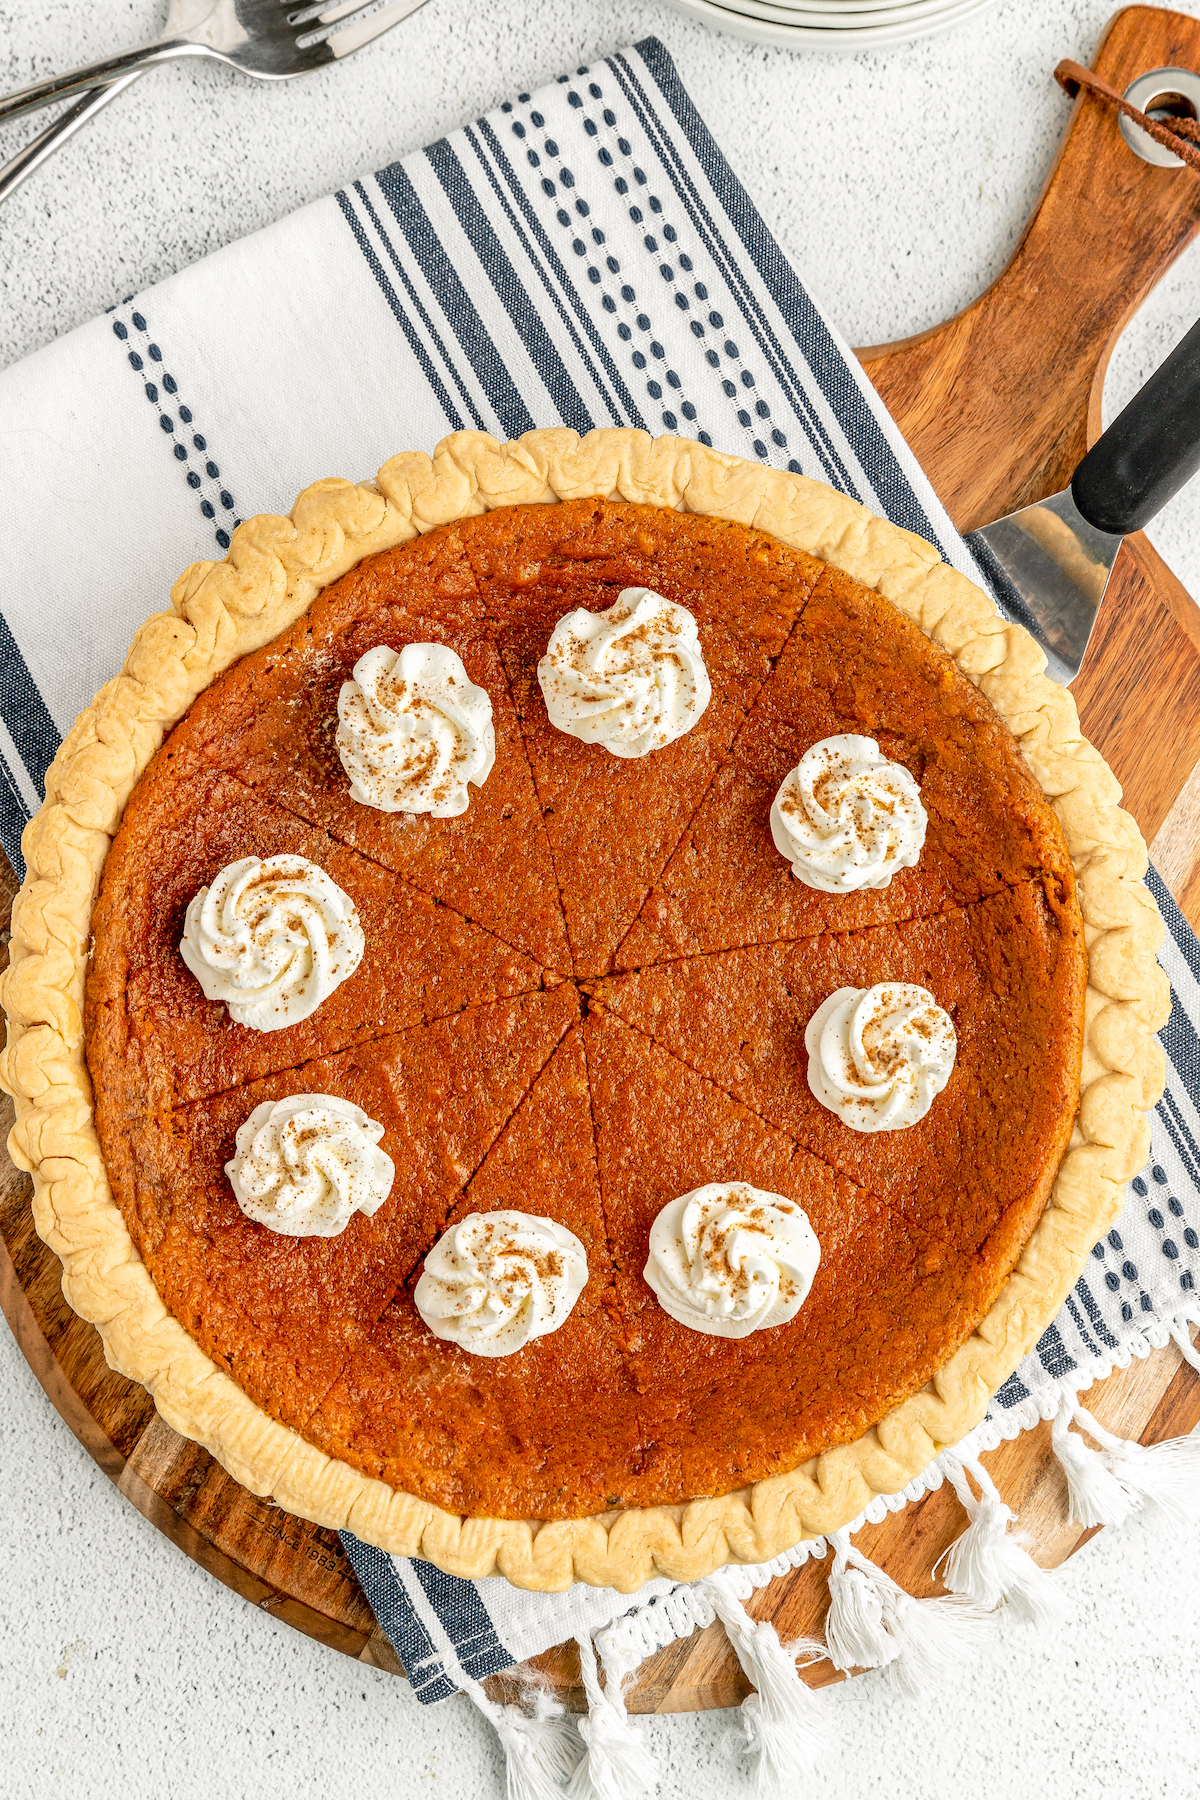 An overhead shot of a sweet potato buttermilk pie, cut into 8 slices and garnished with rosettes of whipped cream and cinnamon.